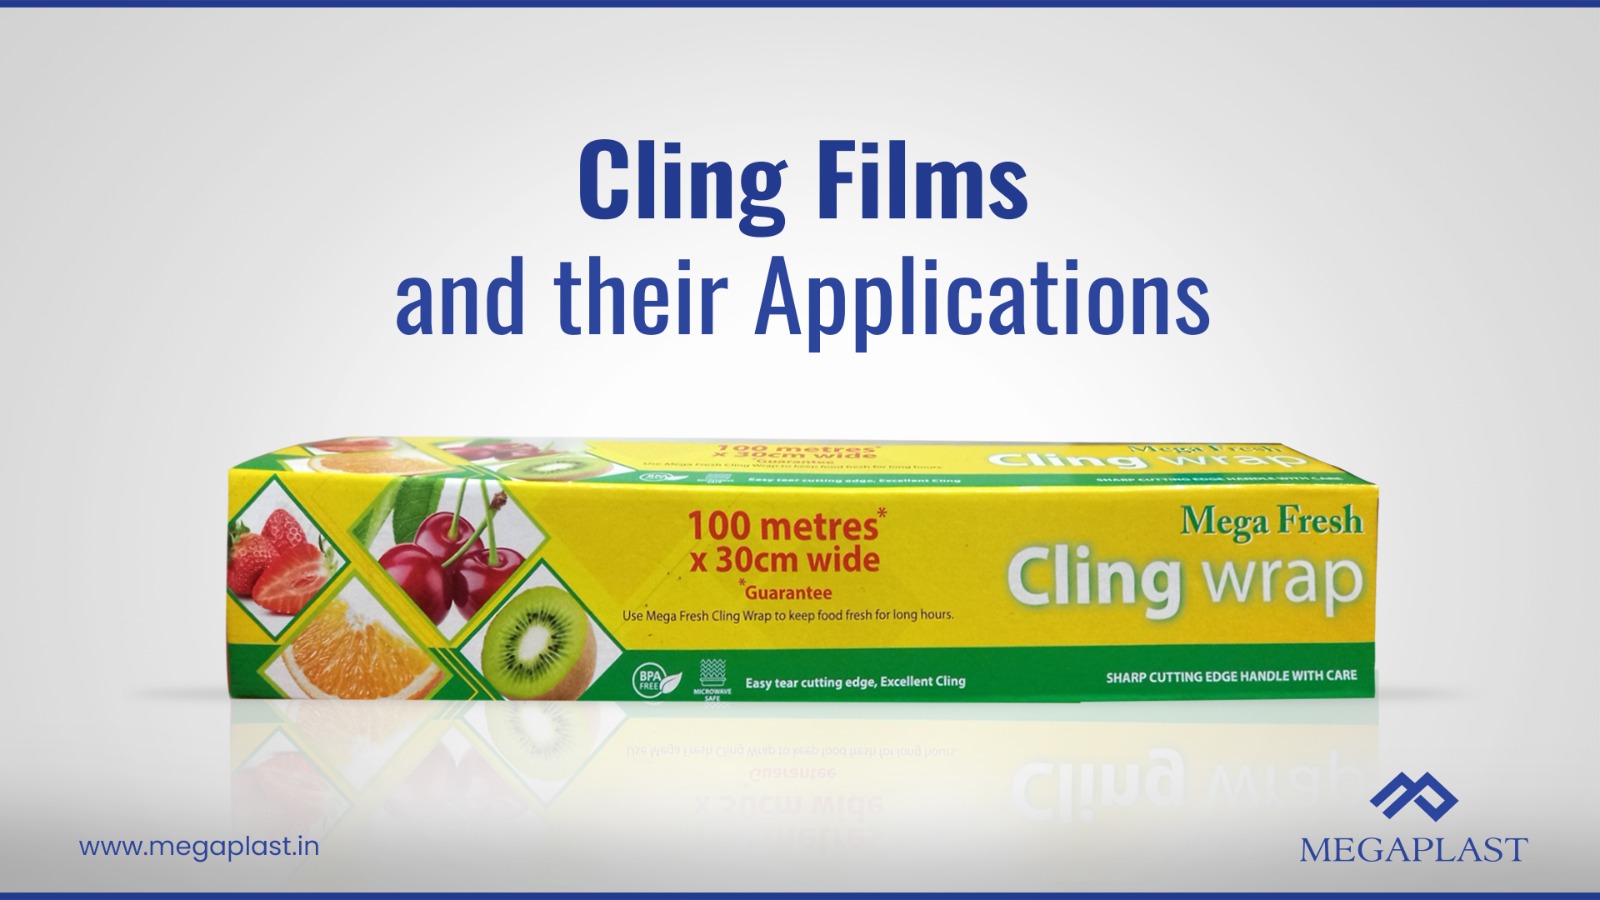 Uses and Benefits of Cling Films